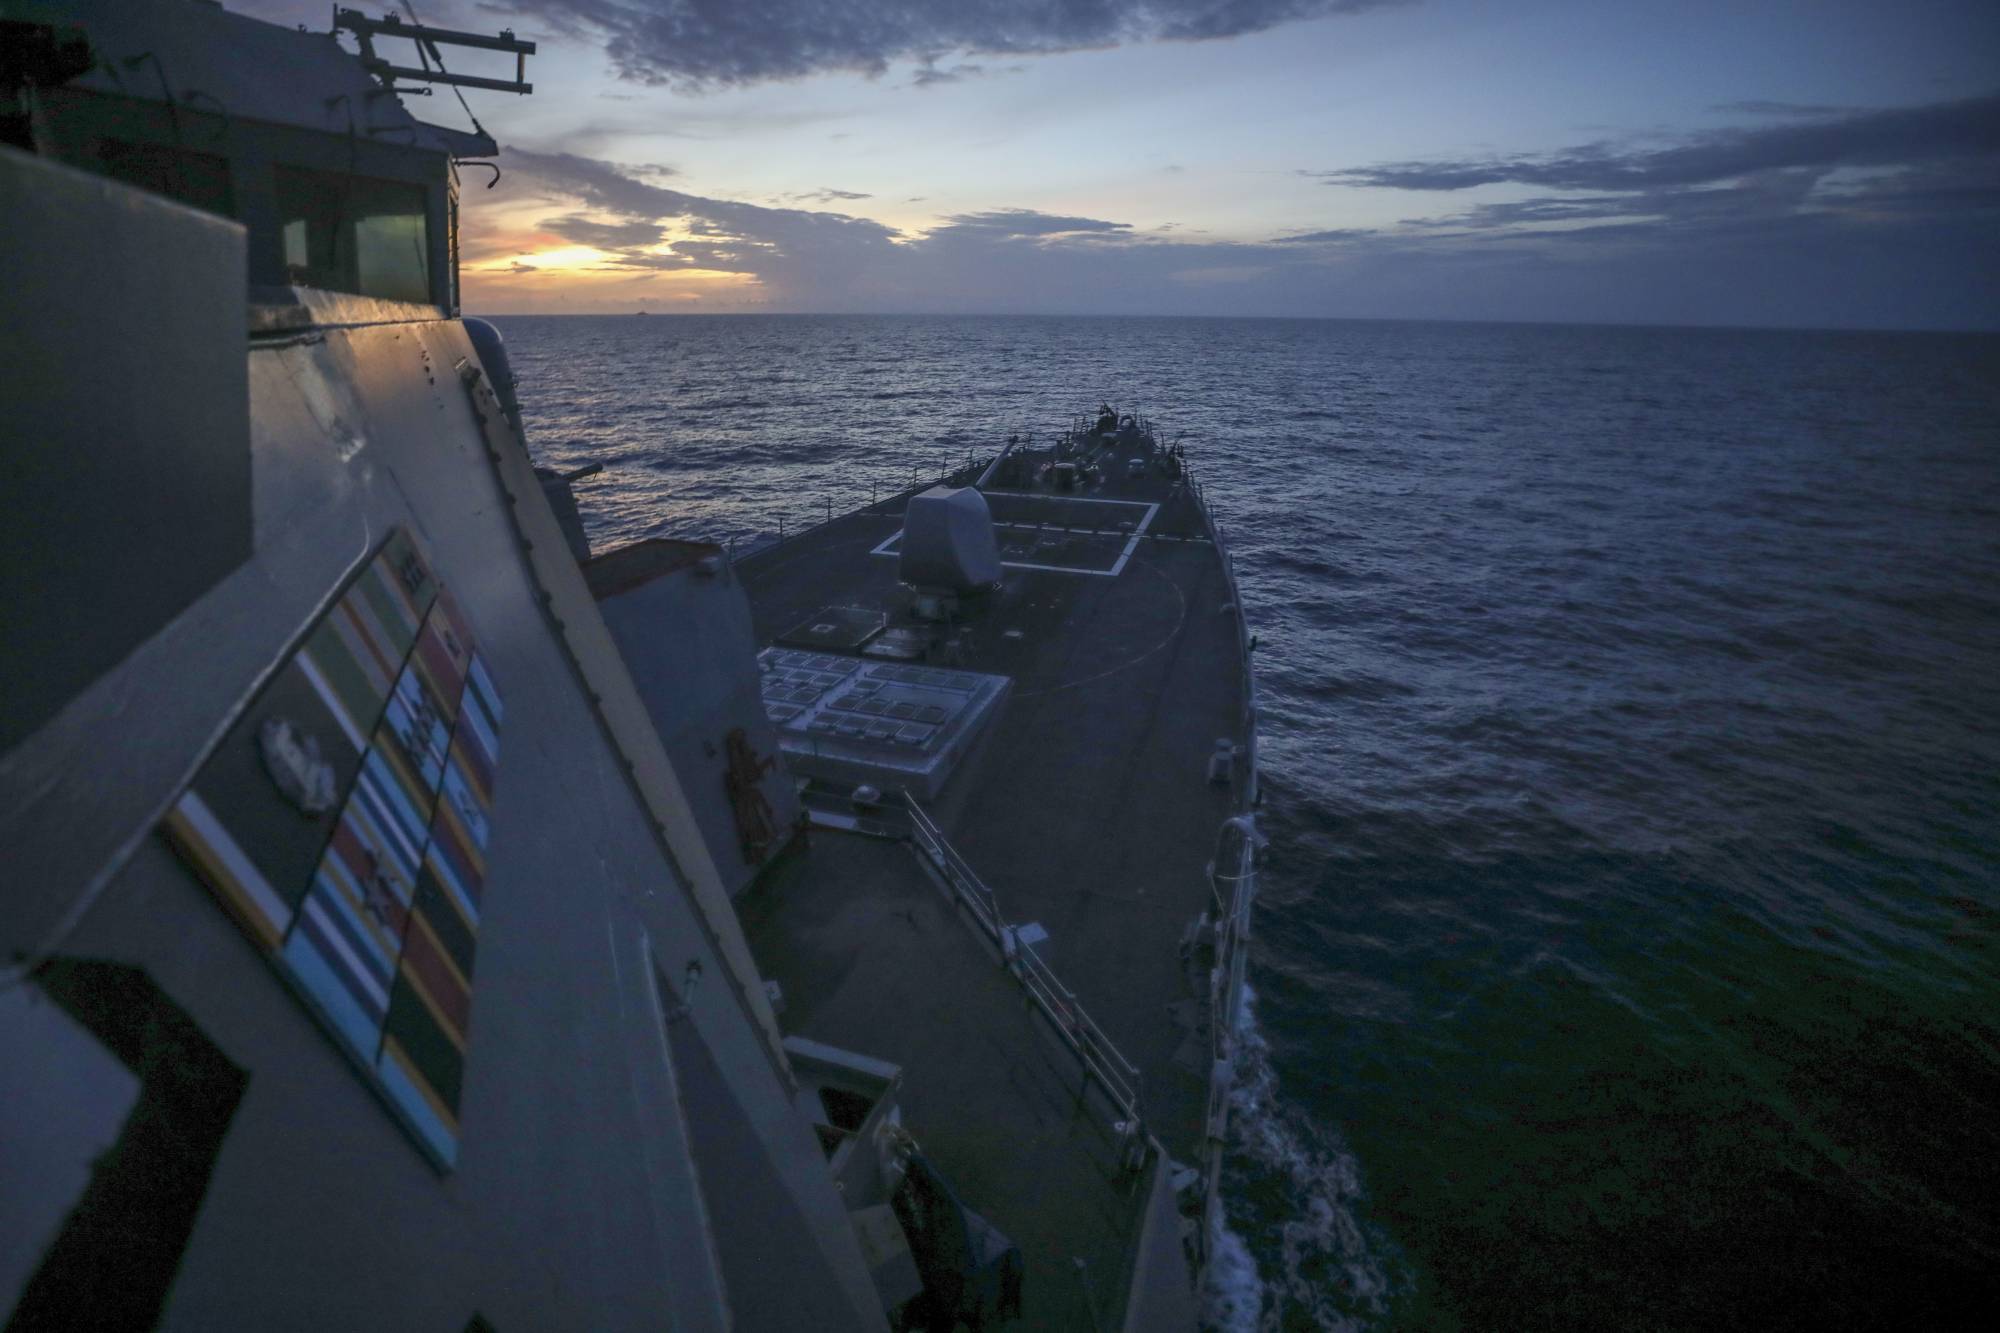 The USS Benfold guided-missile destroyer conducts routine operations in the Philippine Sea on Saturday. | U.S. NAVY